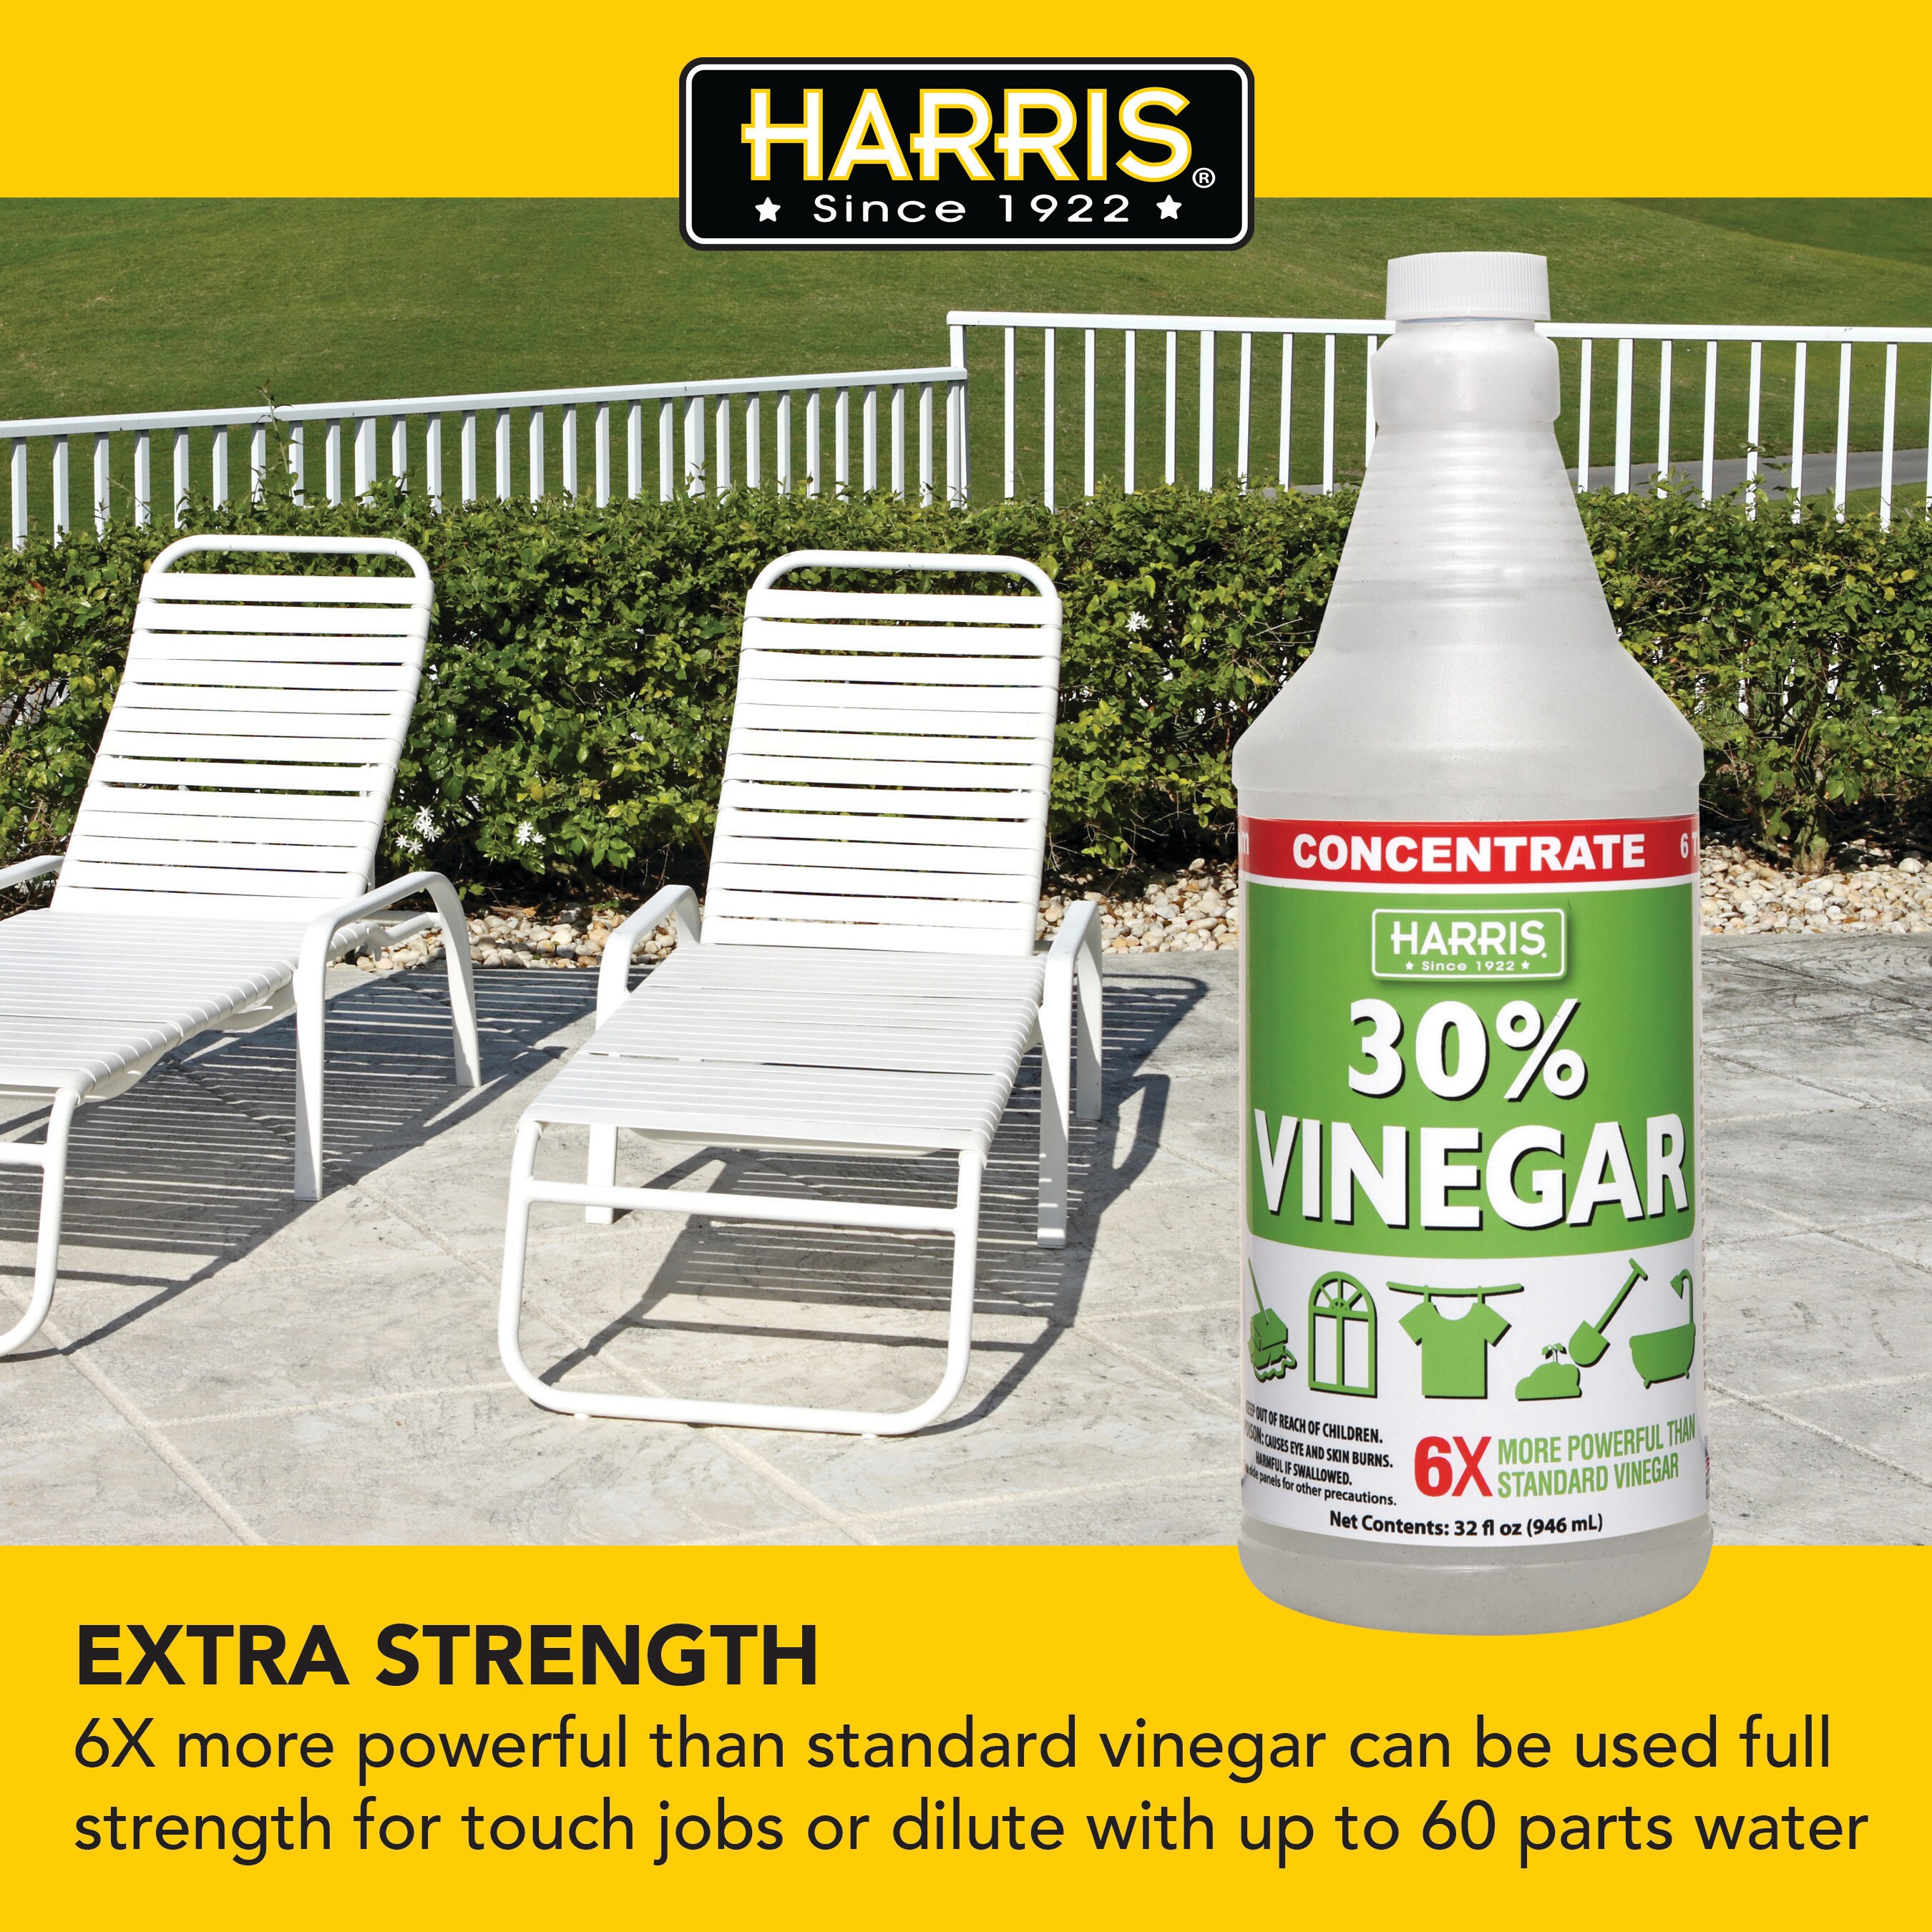 Adios! 30% Vinegar for Cleaning Home - All Purpose Vinegar, Thirty Percent Concentrate Makes 3 Quarts of White Cleaning Vinegar (16oz)